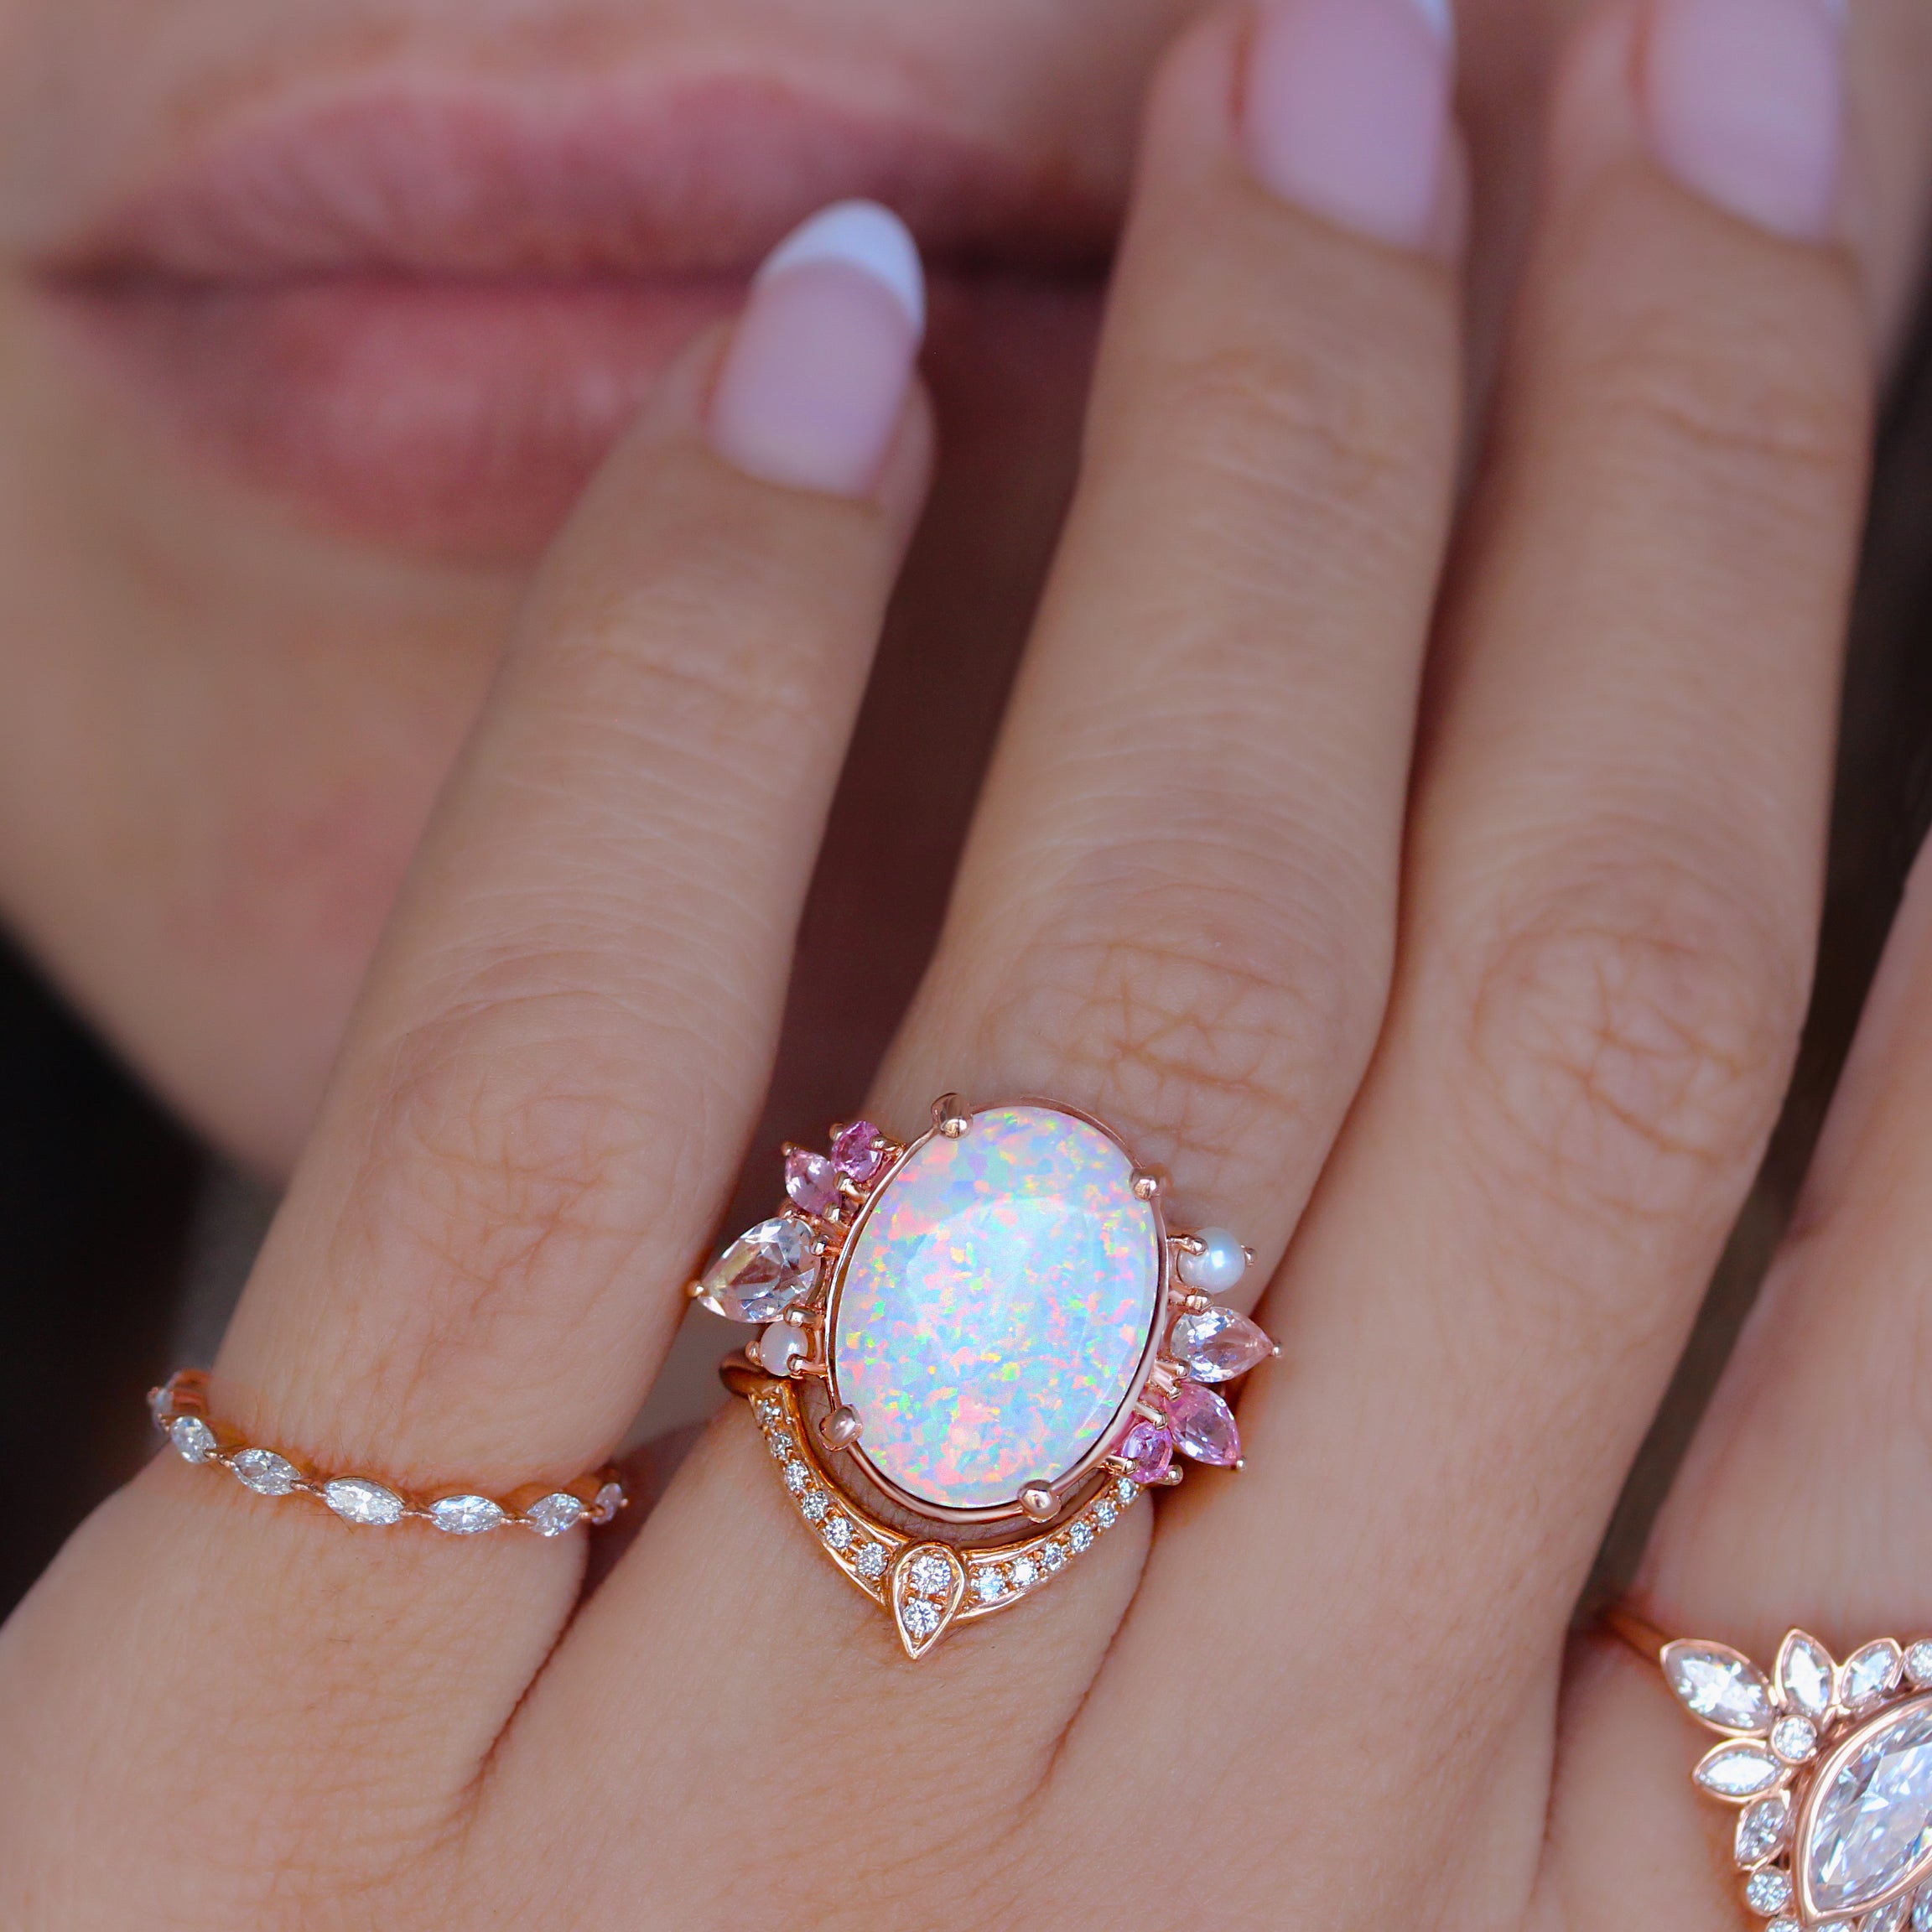 OOAK White Opal, Pink Gemstones and pearls Engagement Ring ♥